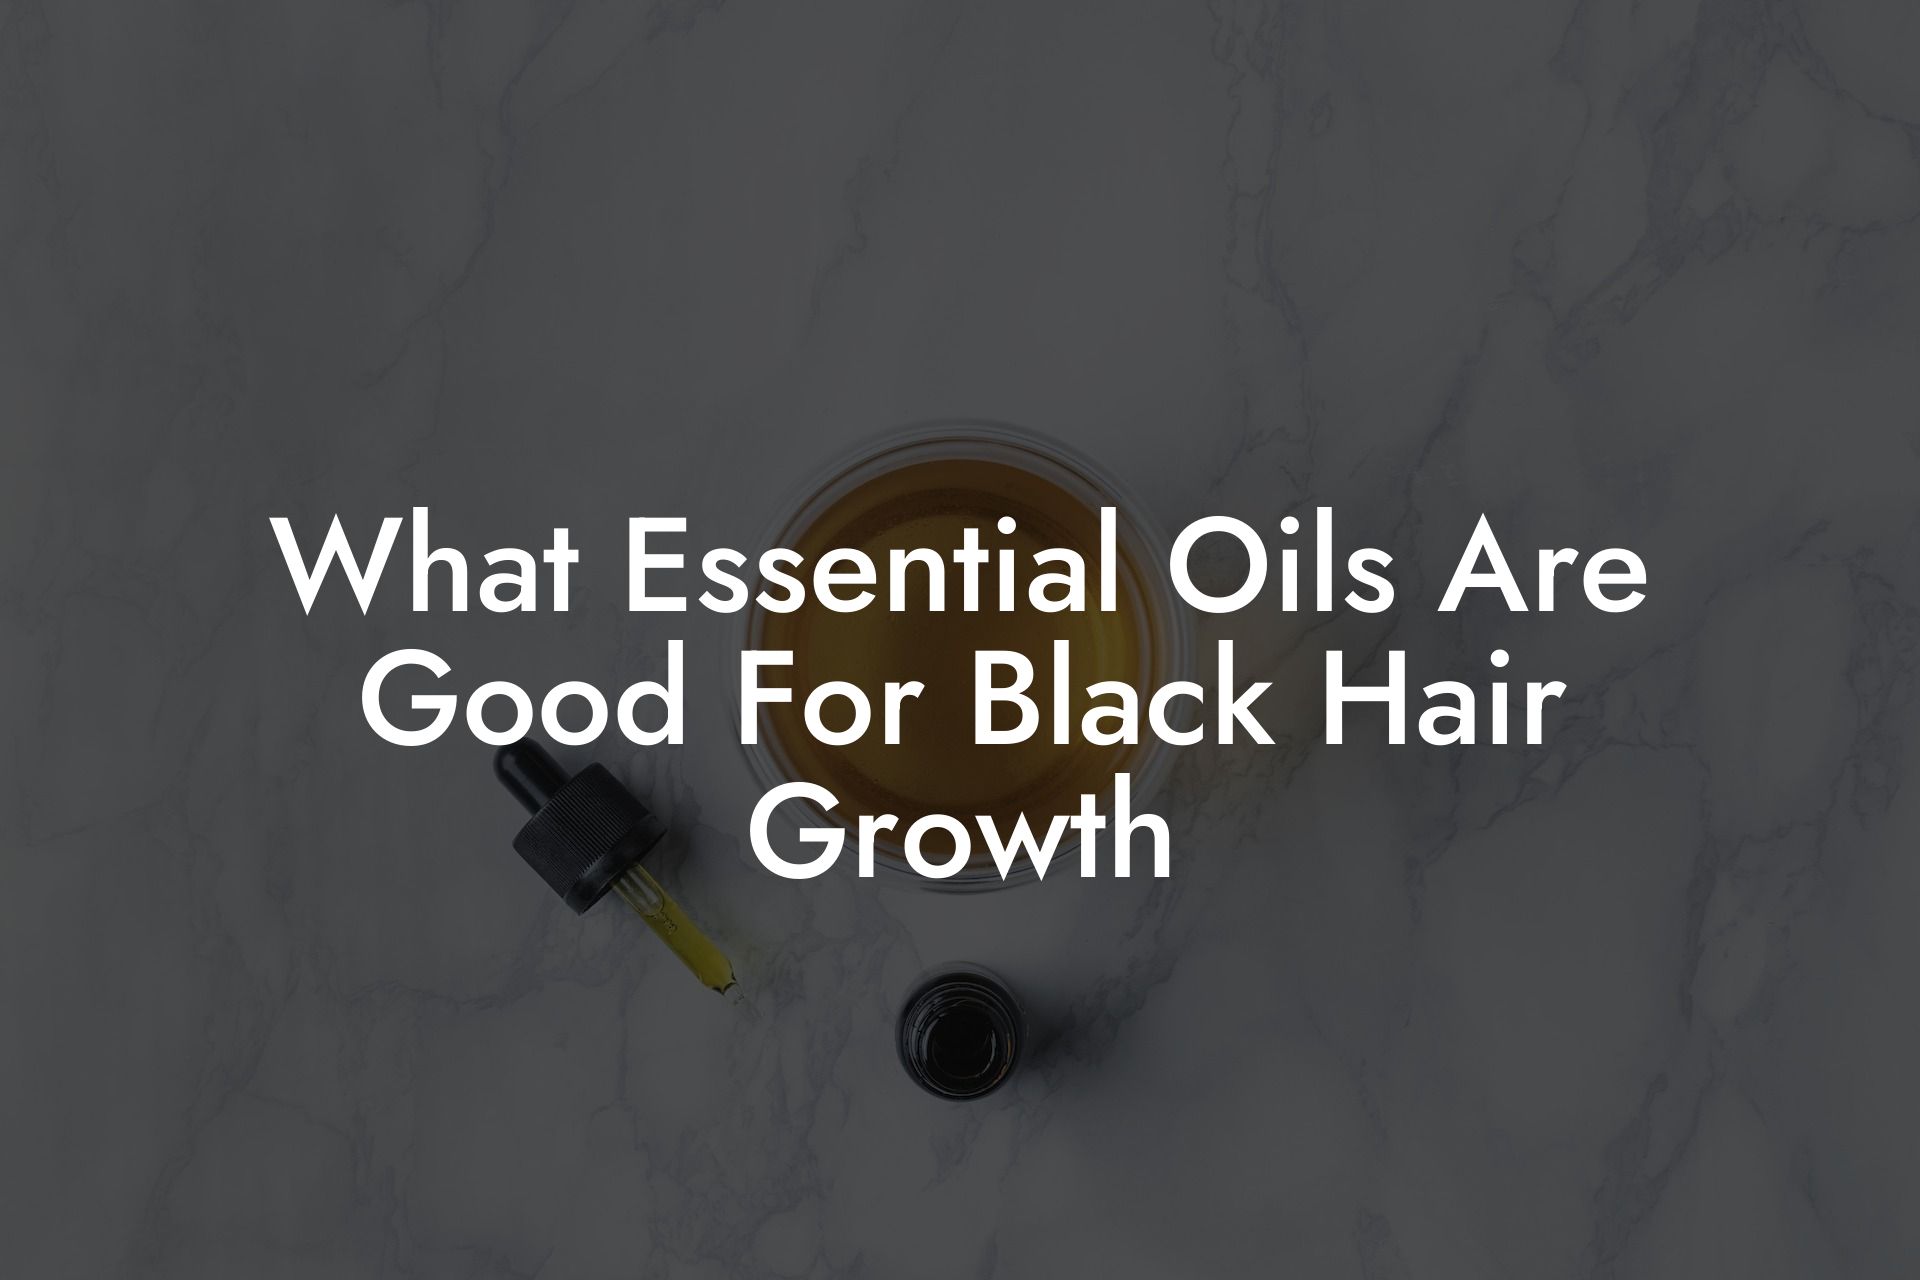 What Essential Oils Are Good For Black Hair Growth